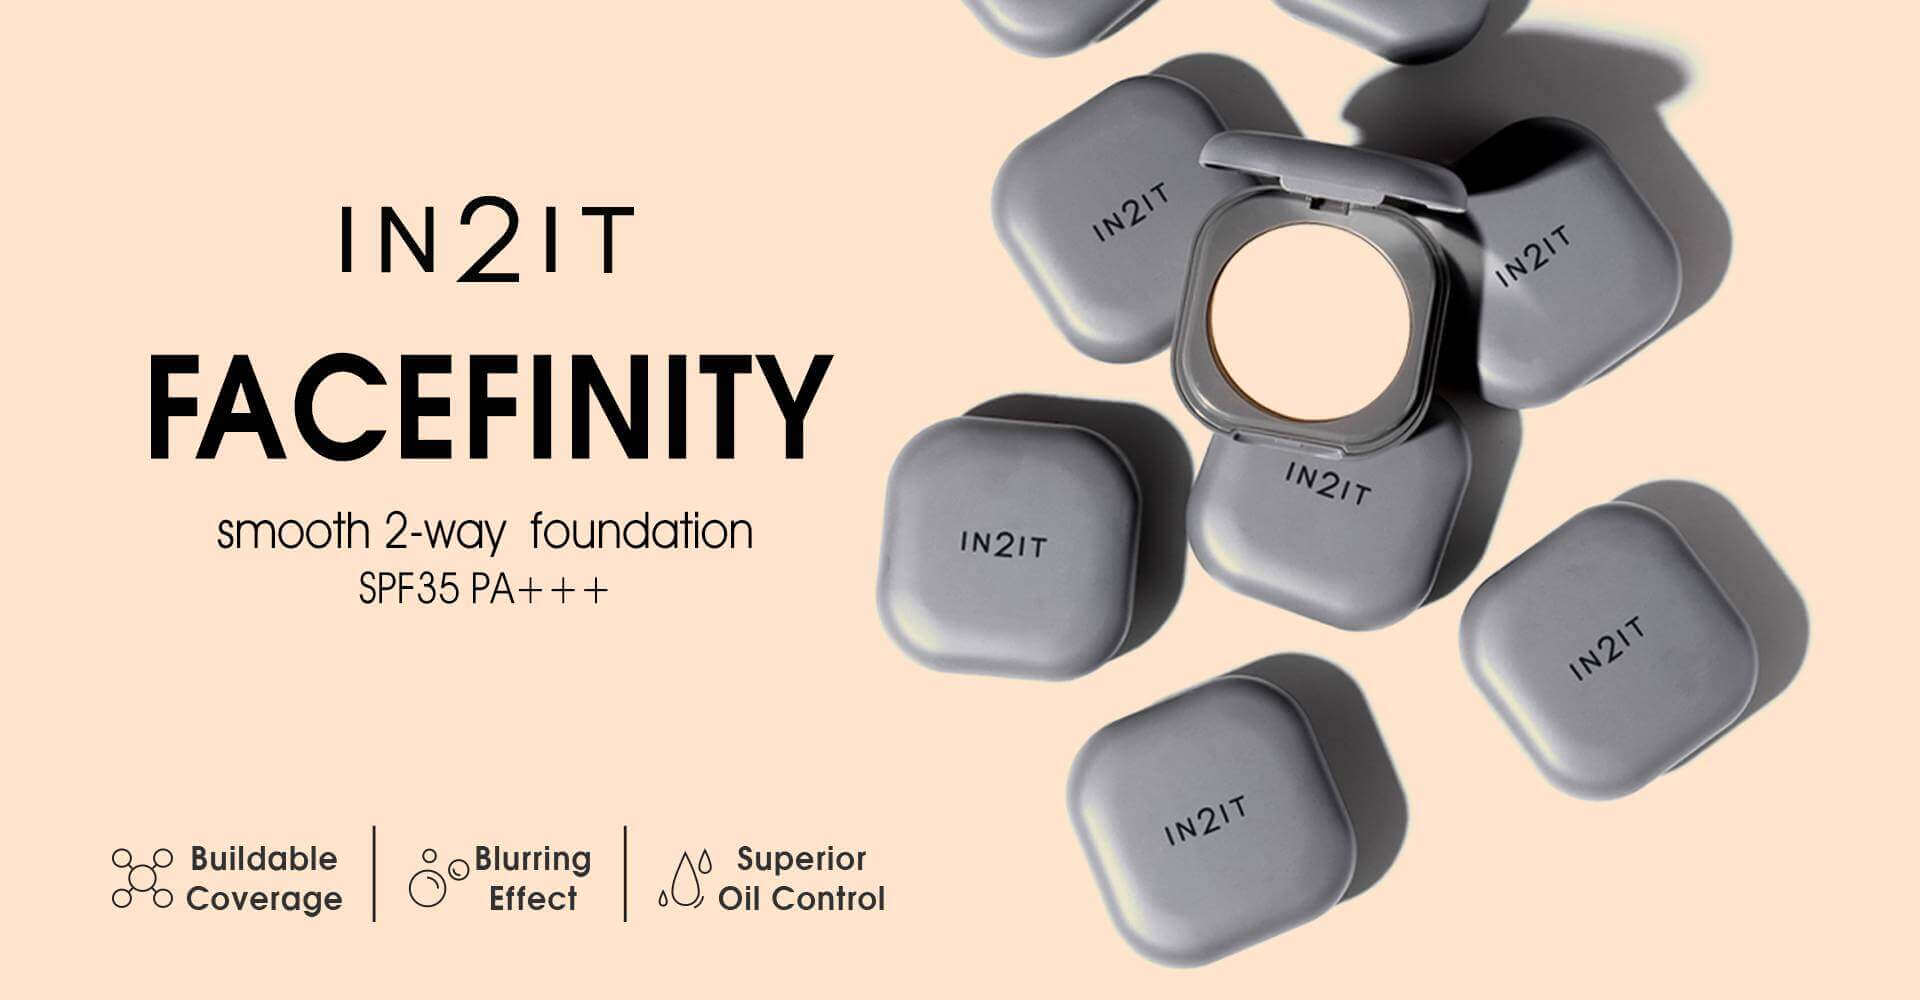 IN2IT,แป้งพัพ,แป้งผสมรองพื้น,IN2IT Facefinity Smooth 2-way Fouhdation SPF35 PA+++,PFE101 Ligh,Facefinity Smooth 2-way Fouhdation SPF35 